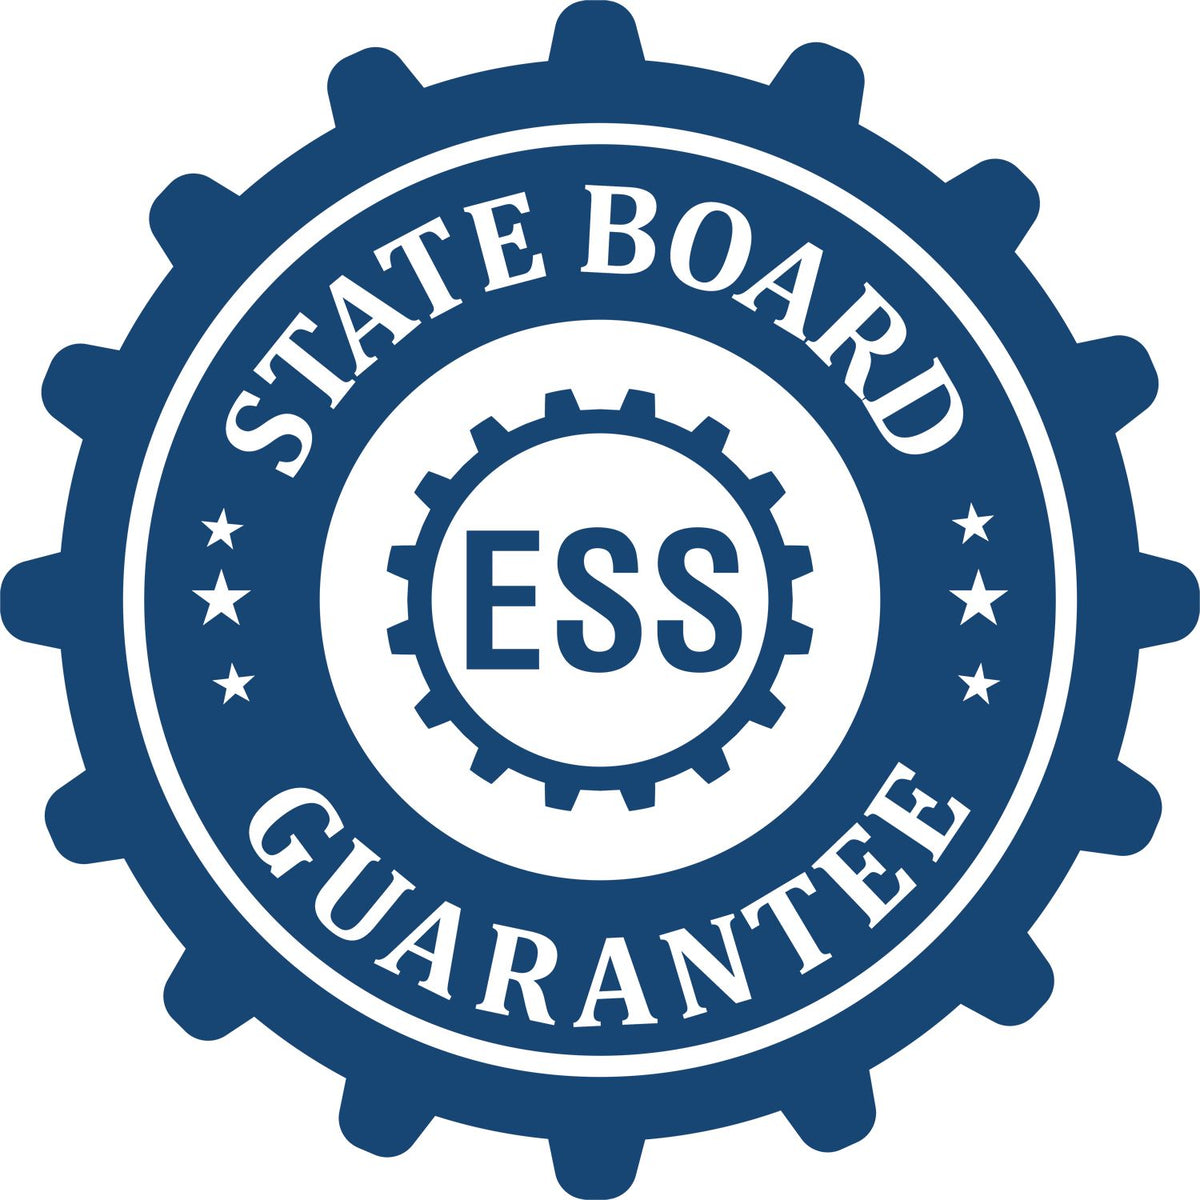 An emblem in a gear shape illustrating a state board guarantee for the Wooden Handle Idaho Rectangular Notary Public Stamp product.